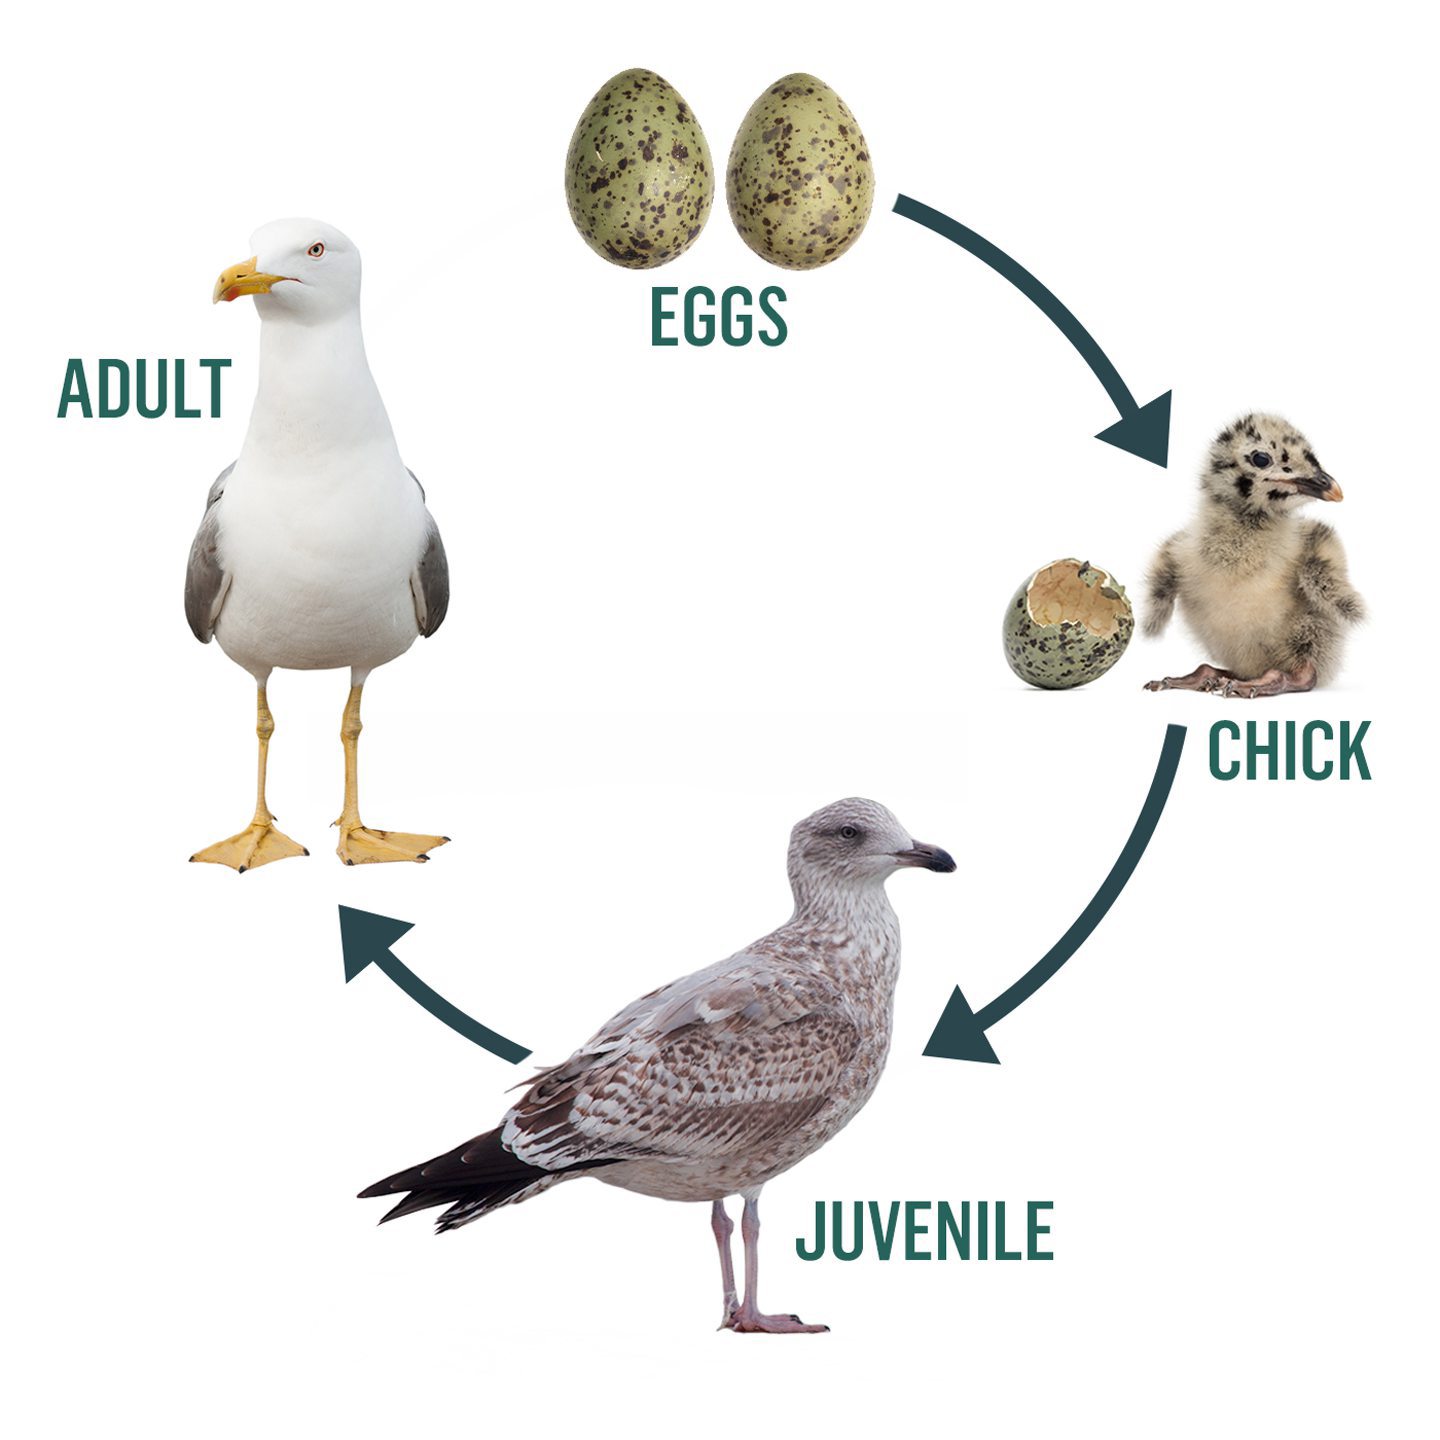 Infographic showing the life cycle of a seagull from an egg to chick to juvenile to fully-grown adult.